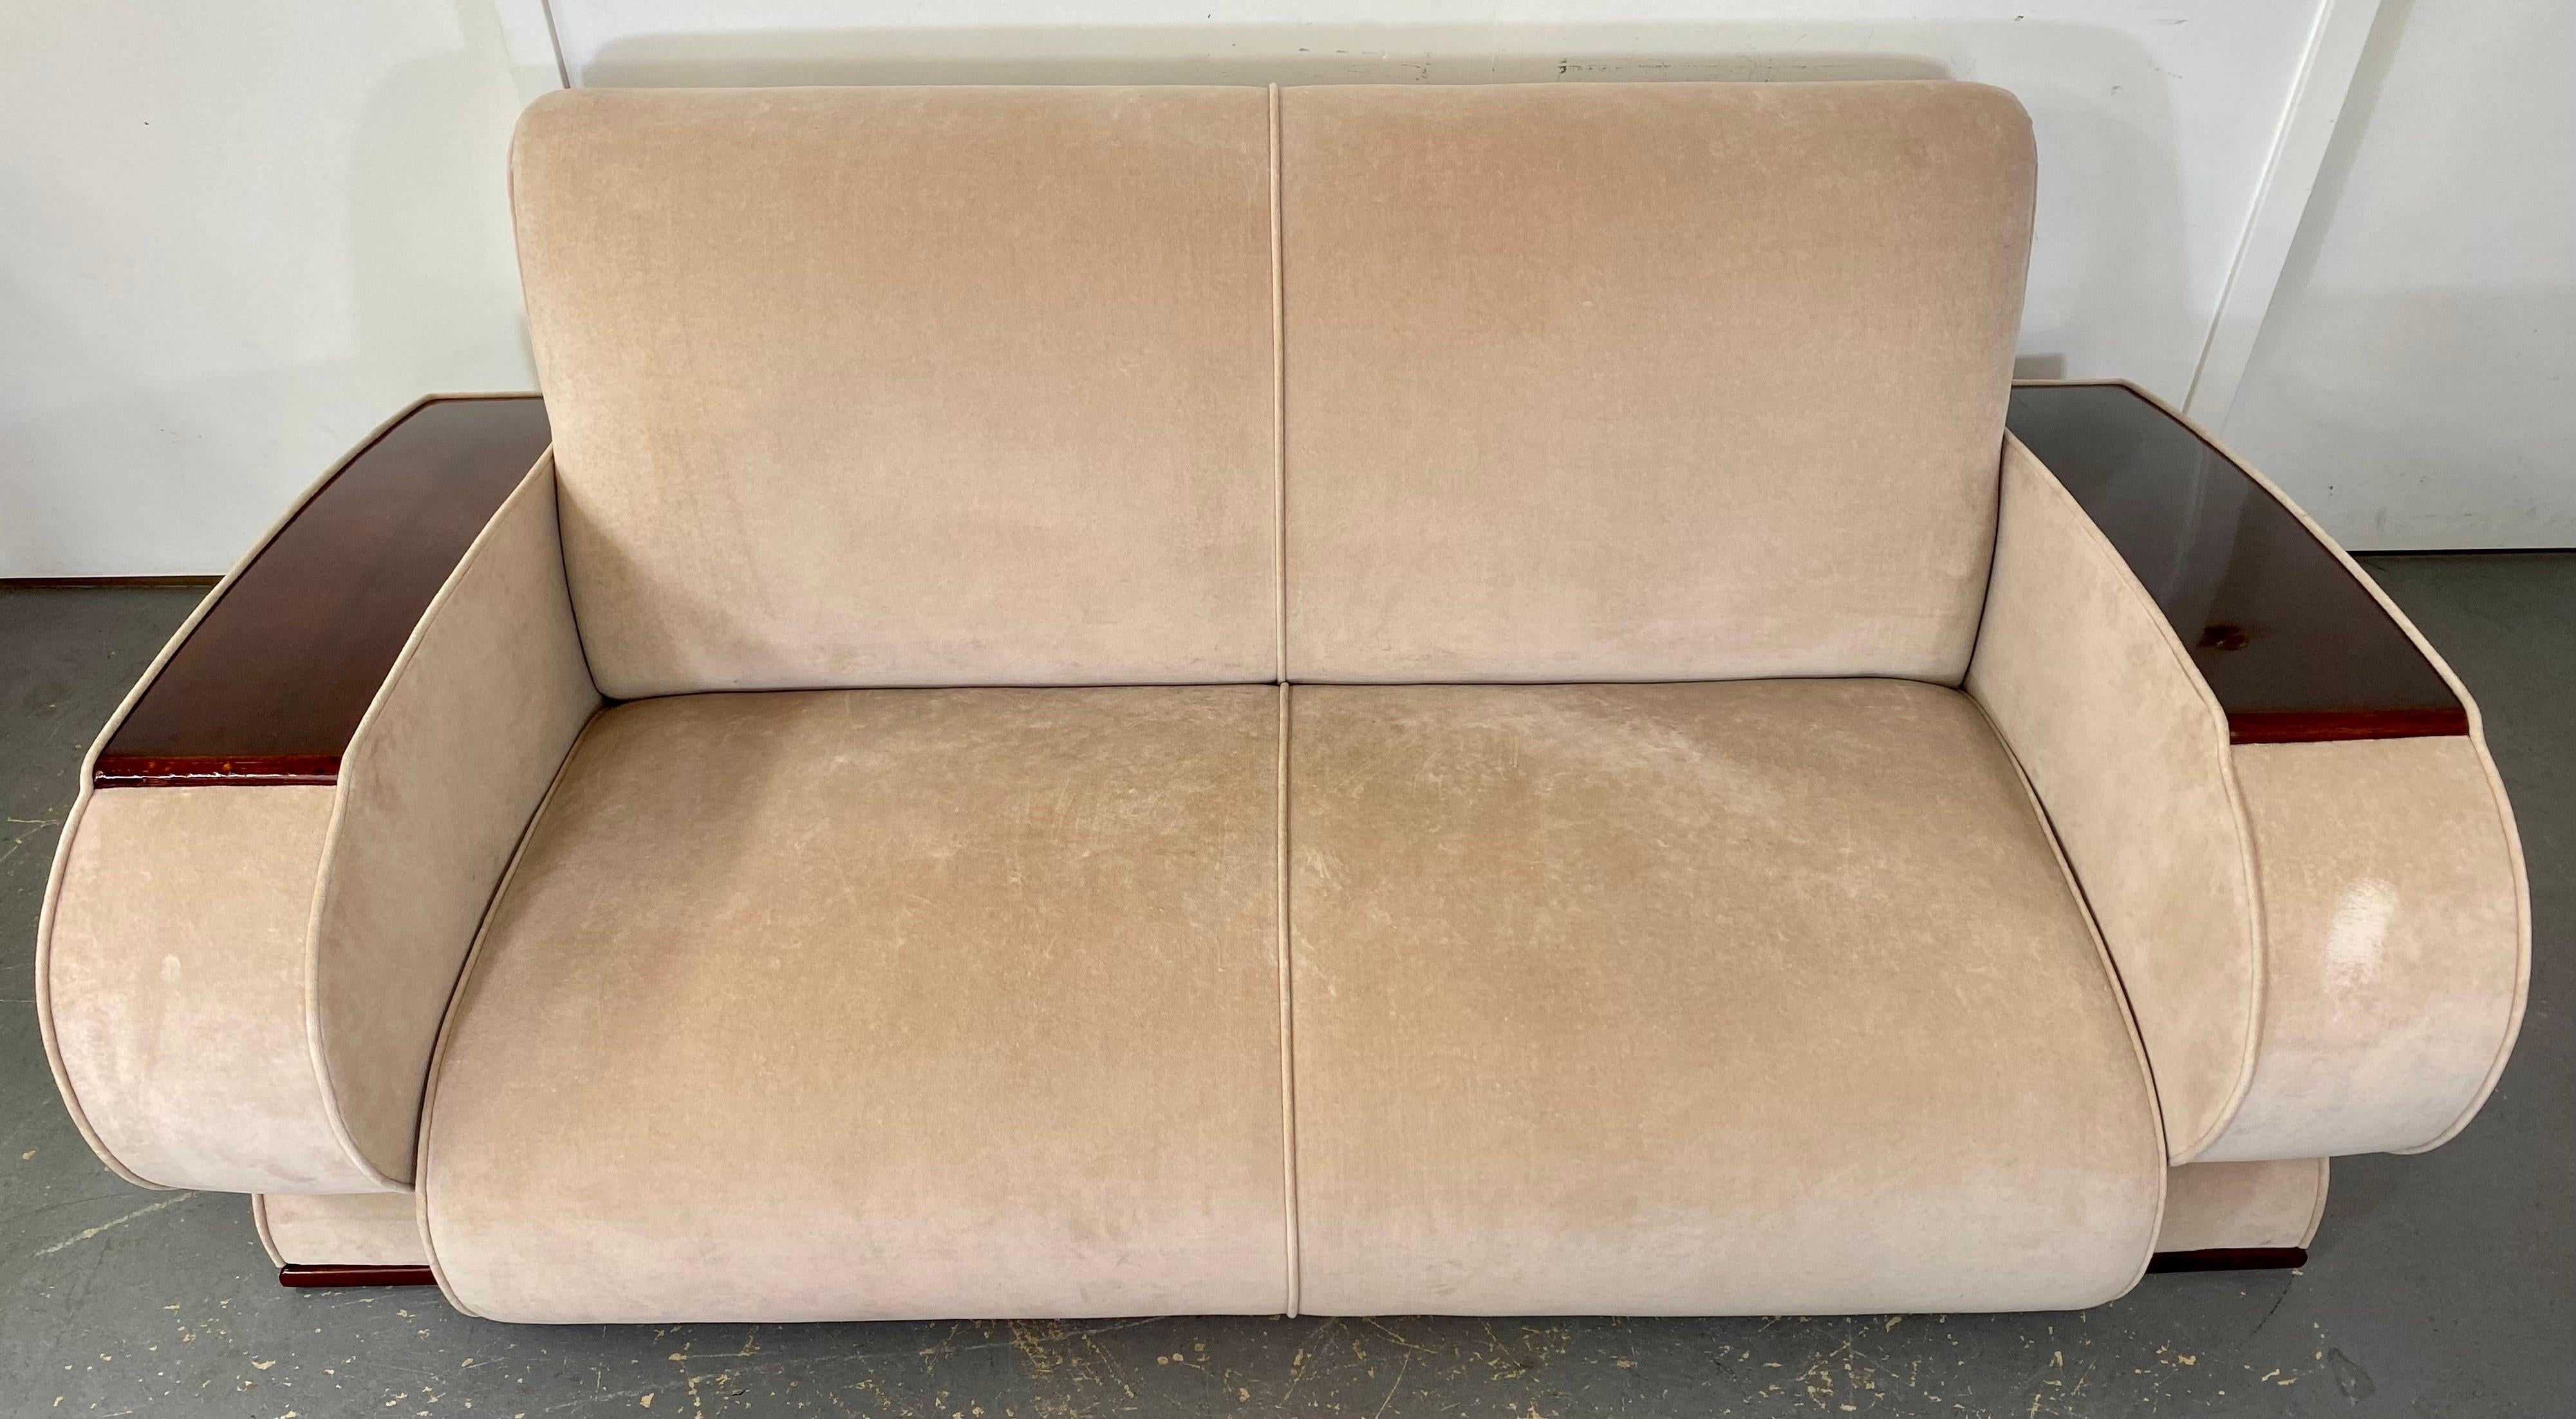 20th Century French Art Deco Sofa or Settee with Beige Suede Upholstery & Rosewood Armrests  For Sale